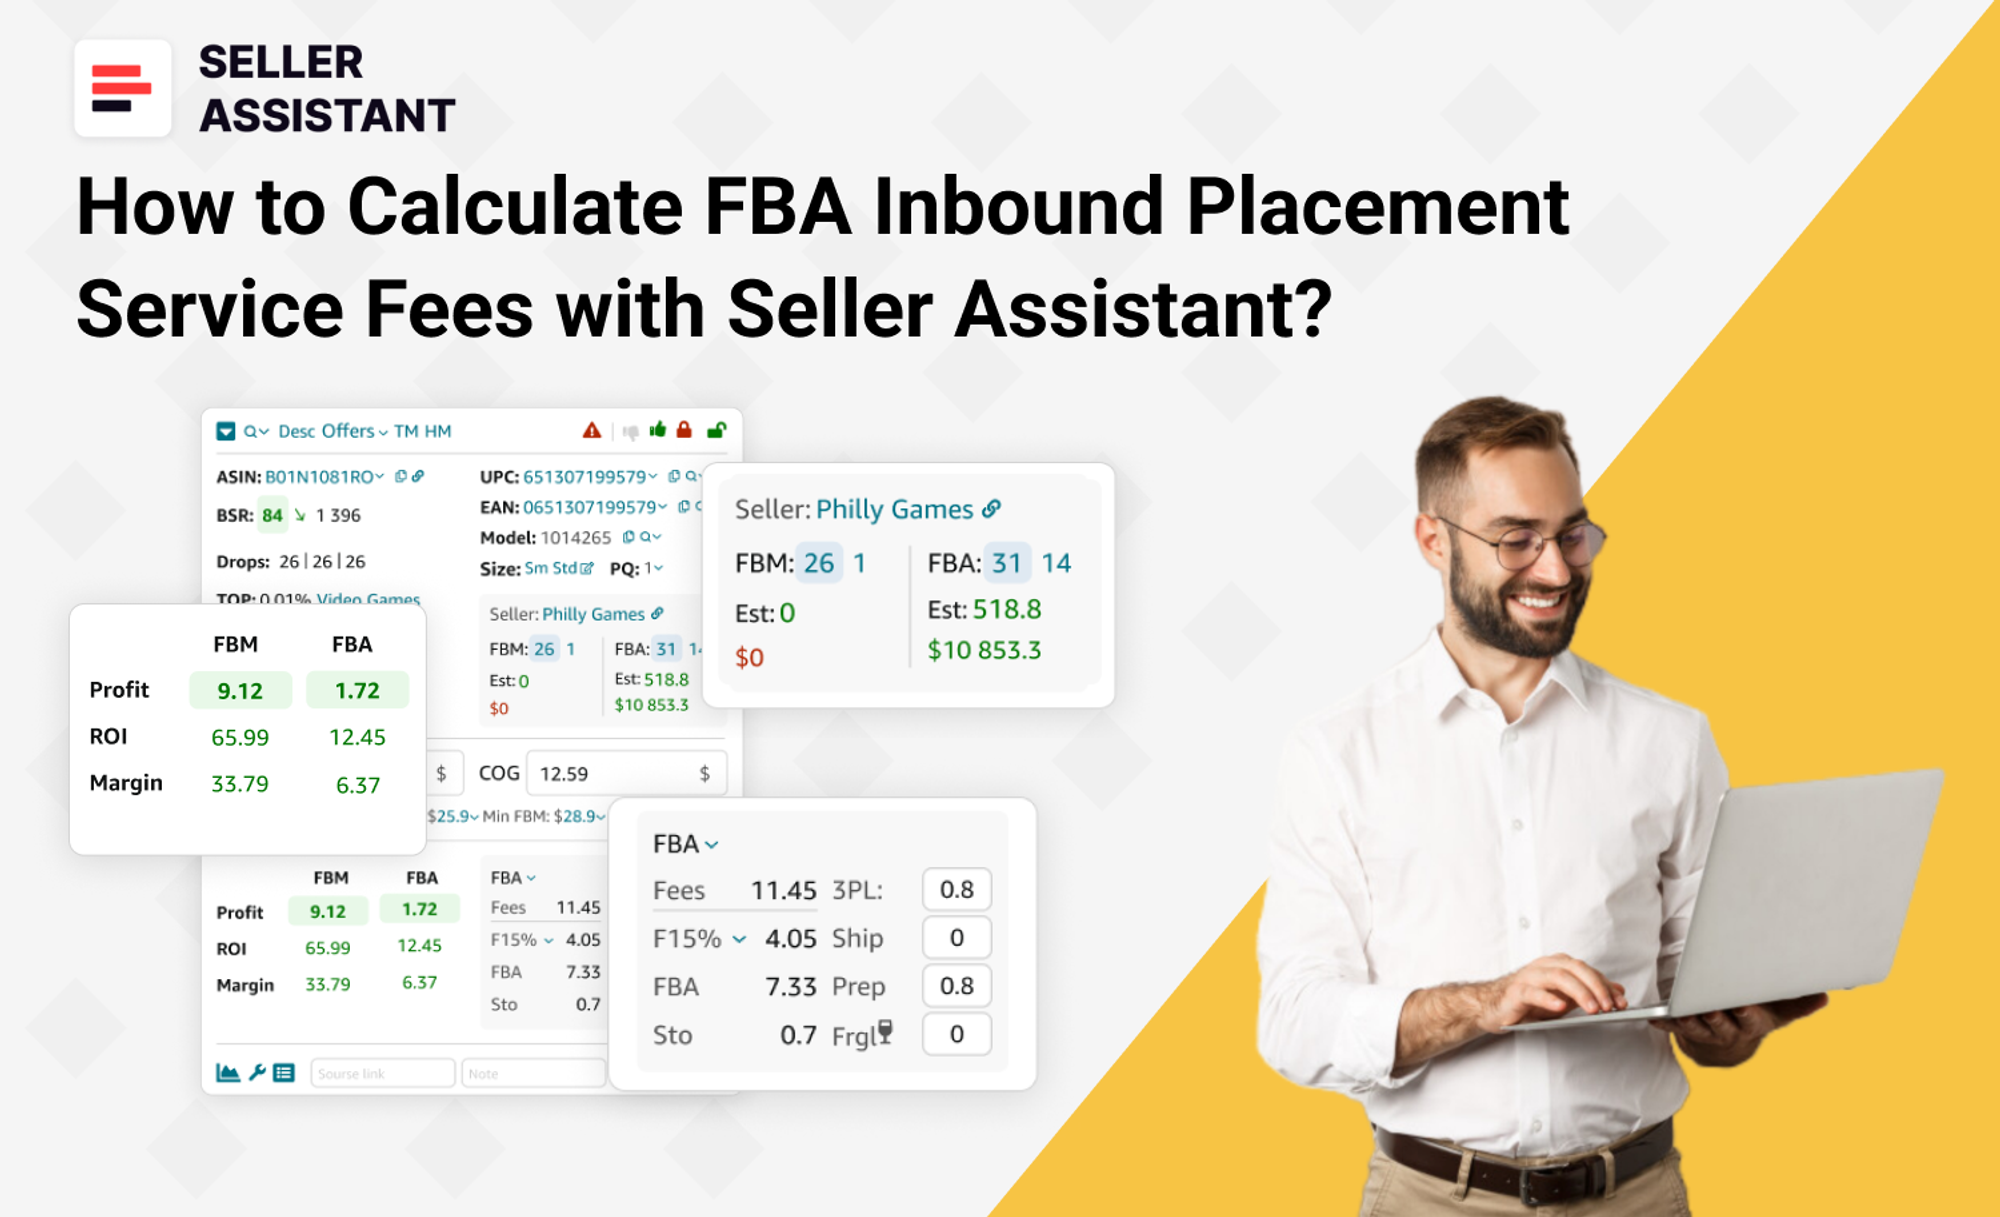 How to Calculate FBA Inbound Placement Service Fees with Seller Assistant?